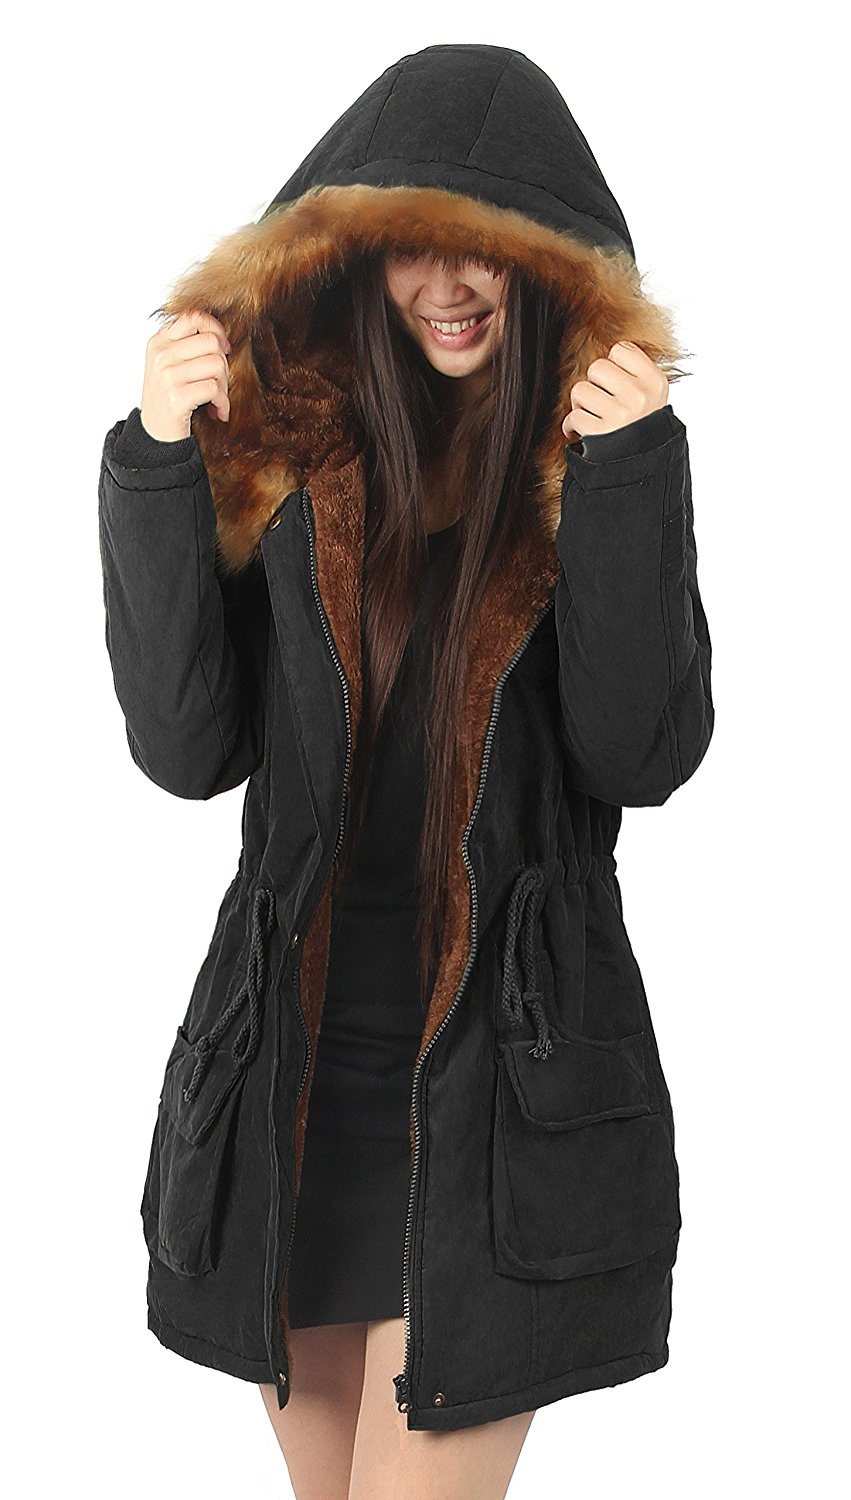 Xiaolv88 Womens Hooded Warm Coats Parkas with Faux Fur Jackets